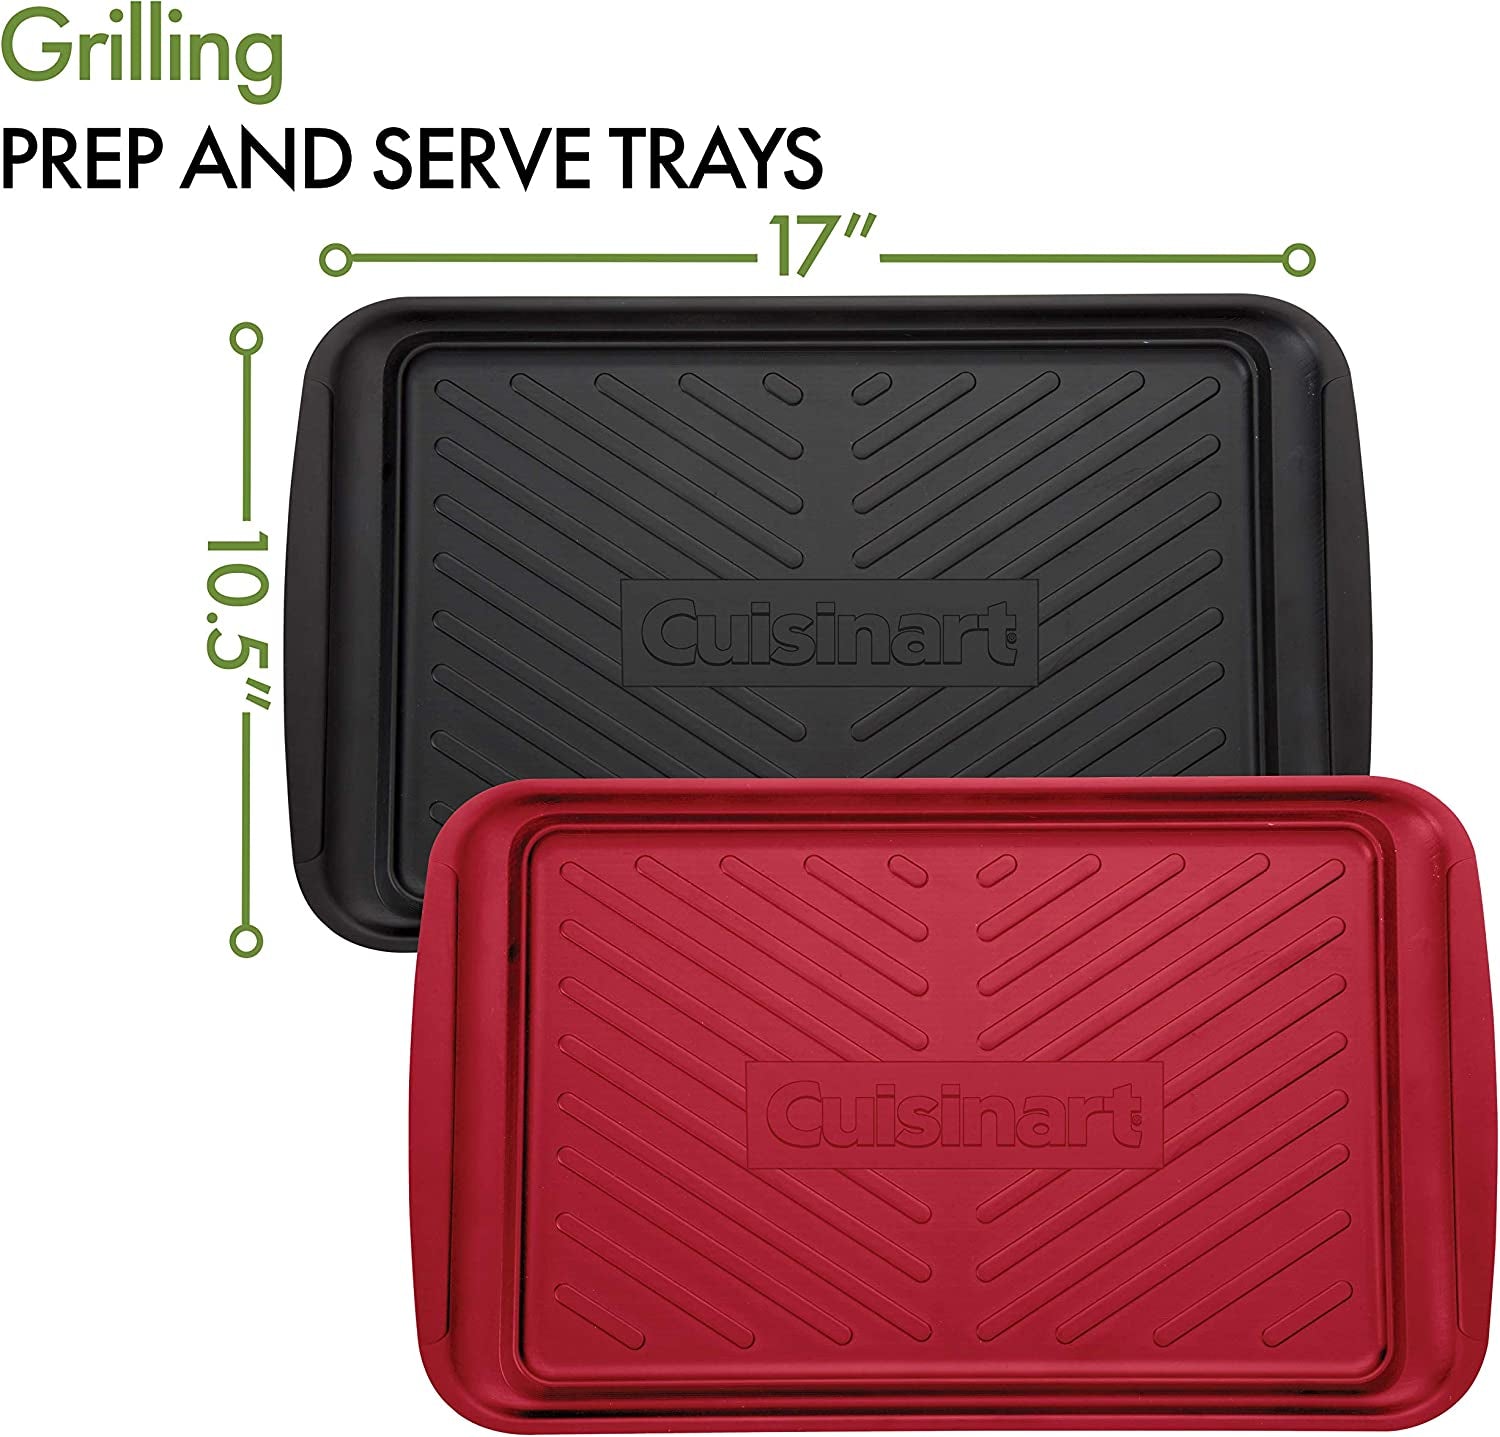 Grilling Prep and Serve Trays, Large 17 X 10.5, Black and Red, CPK-200